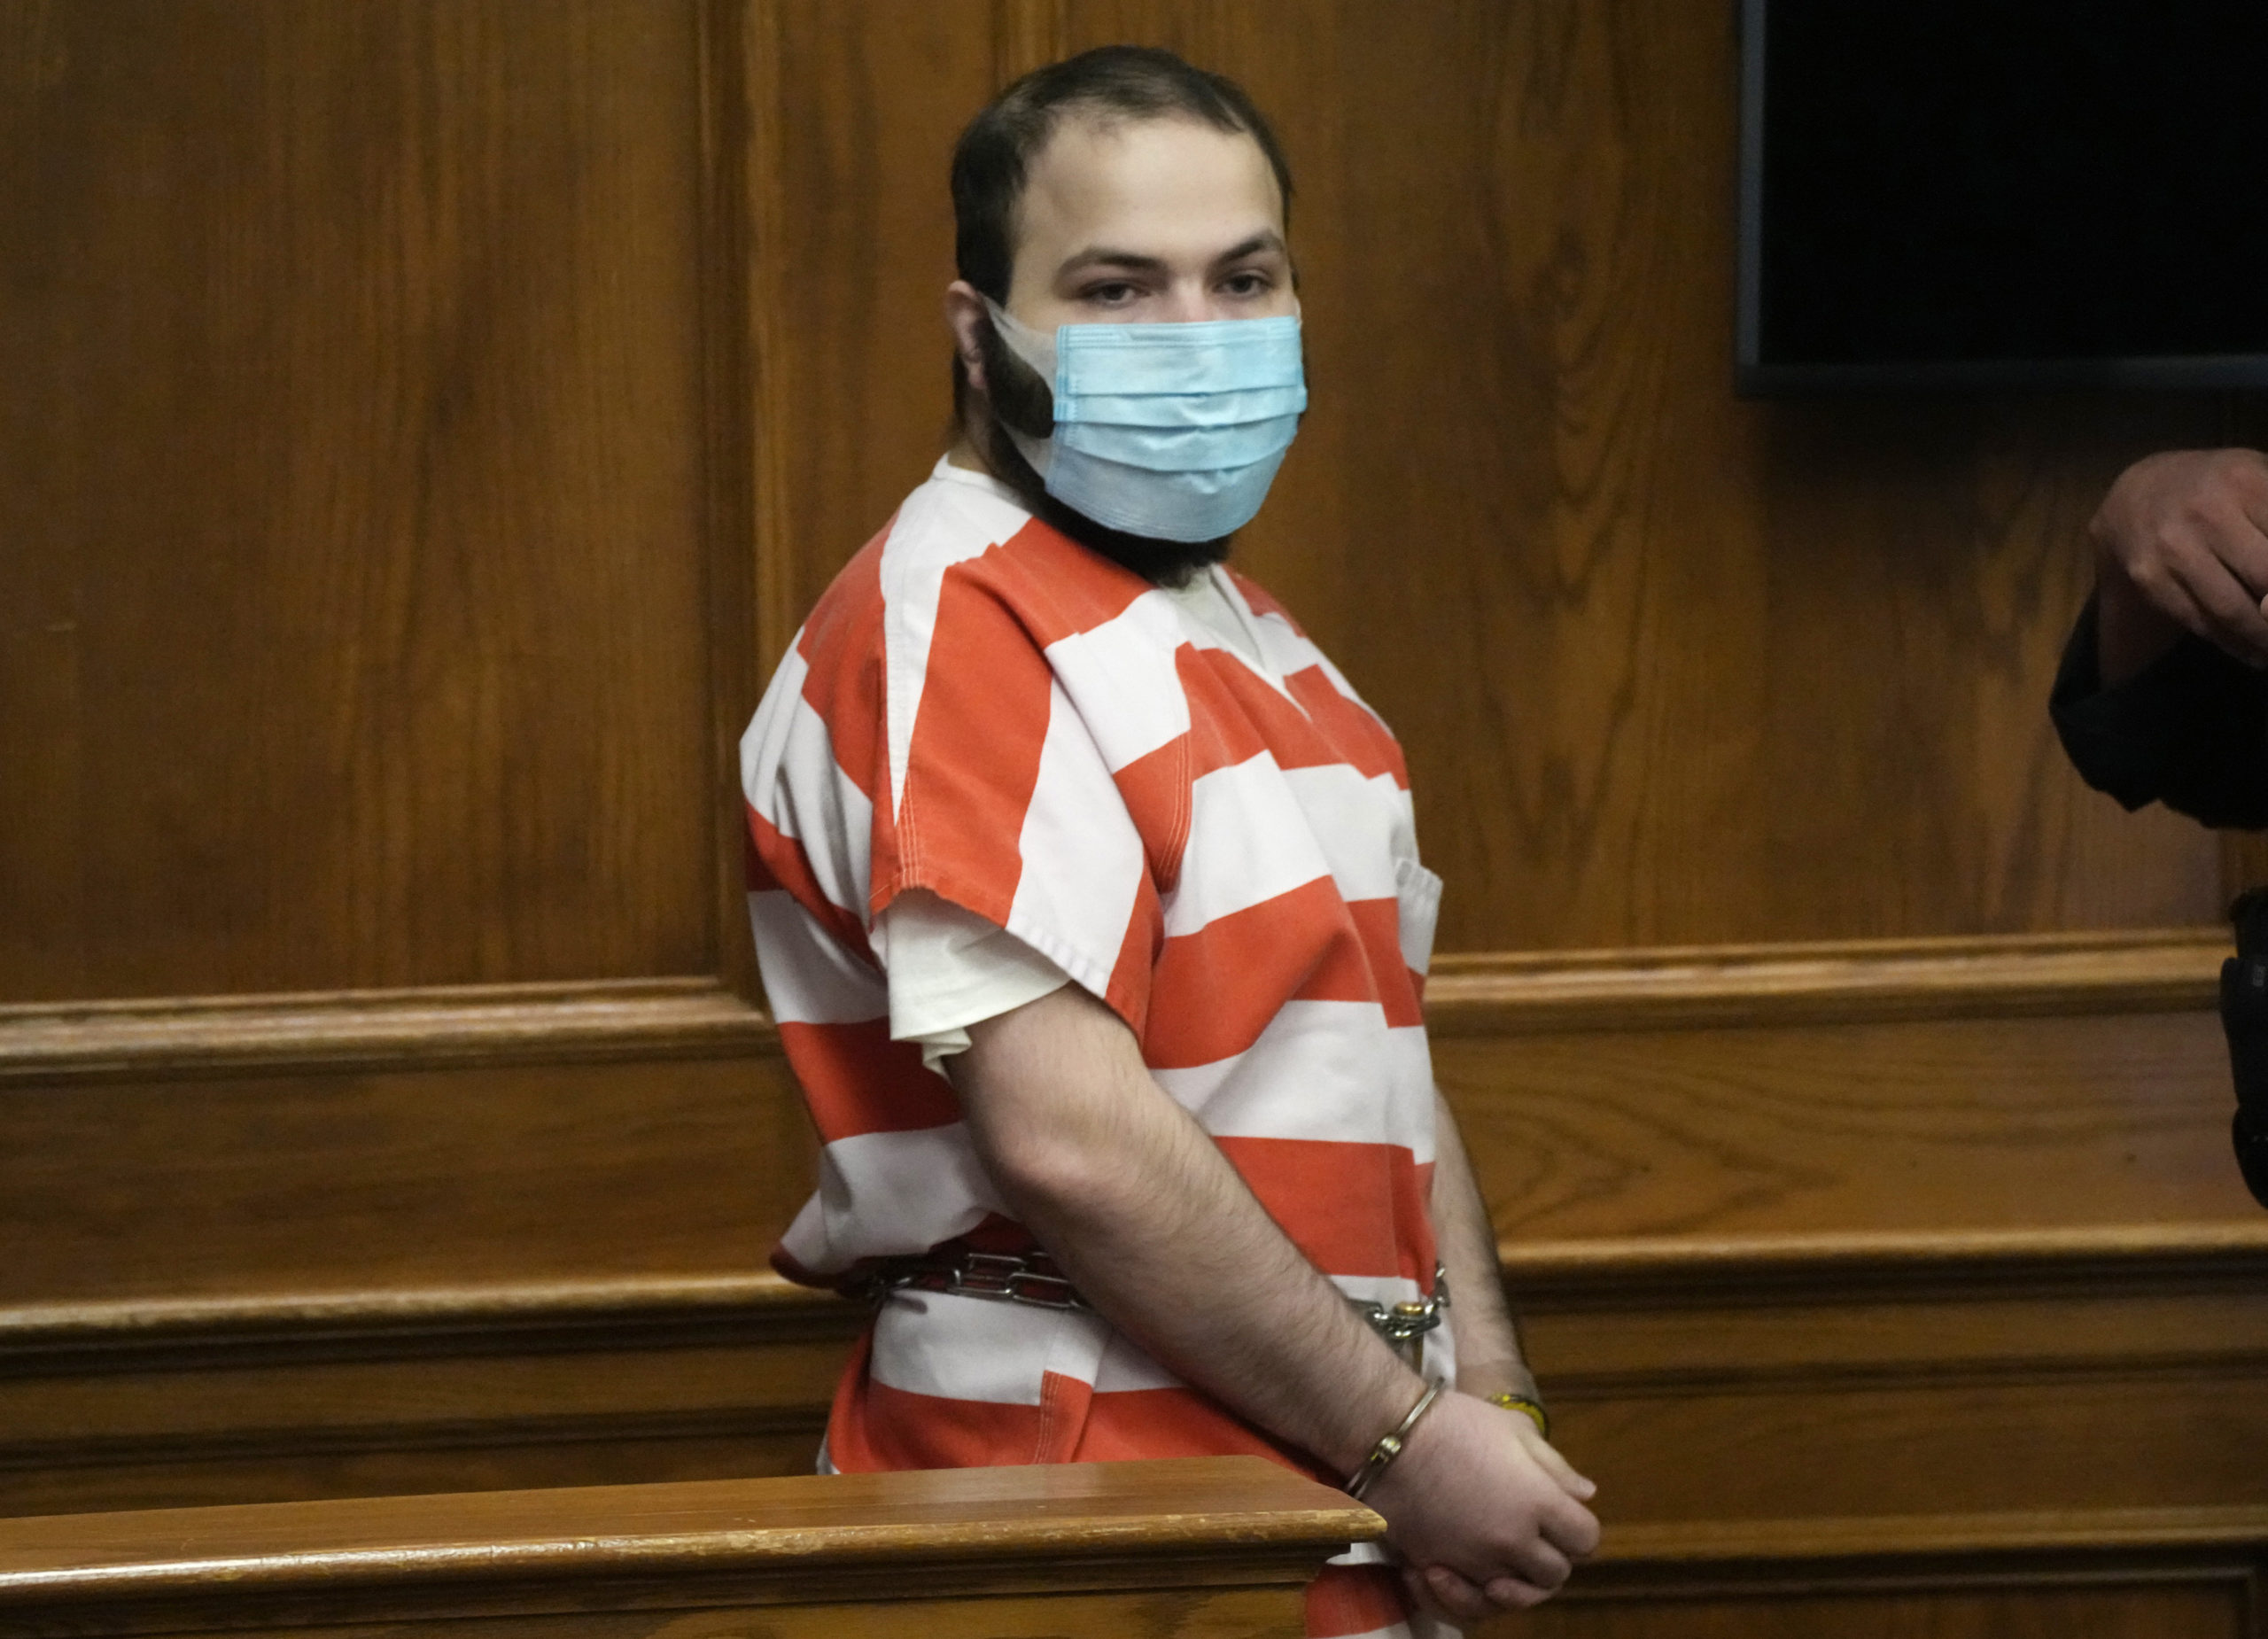 A Colorado judge ruled Friday that Ahmad Al Aliwi Alissa, accused of killing 10 people at a Colorado supermarket in a 2021 rampage, is mentally competent to stand trial.